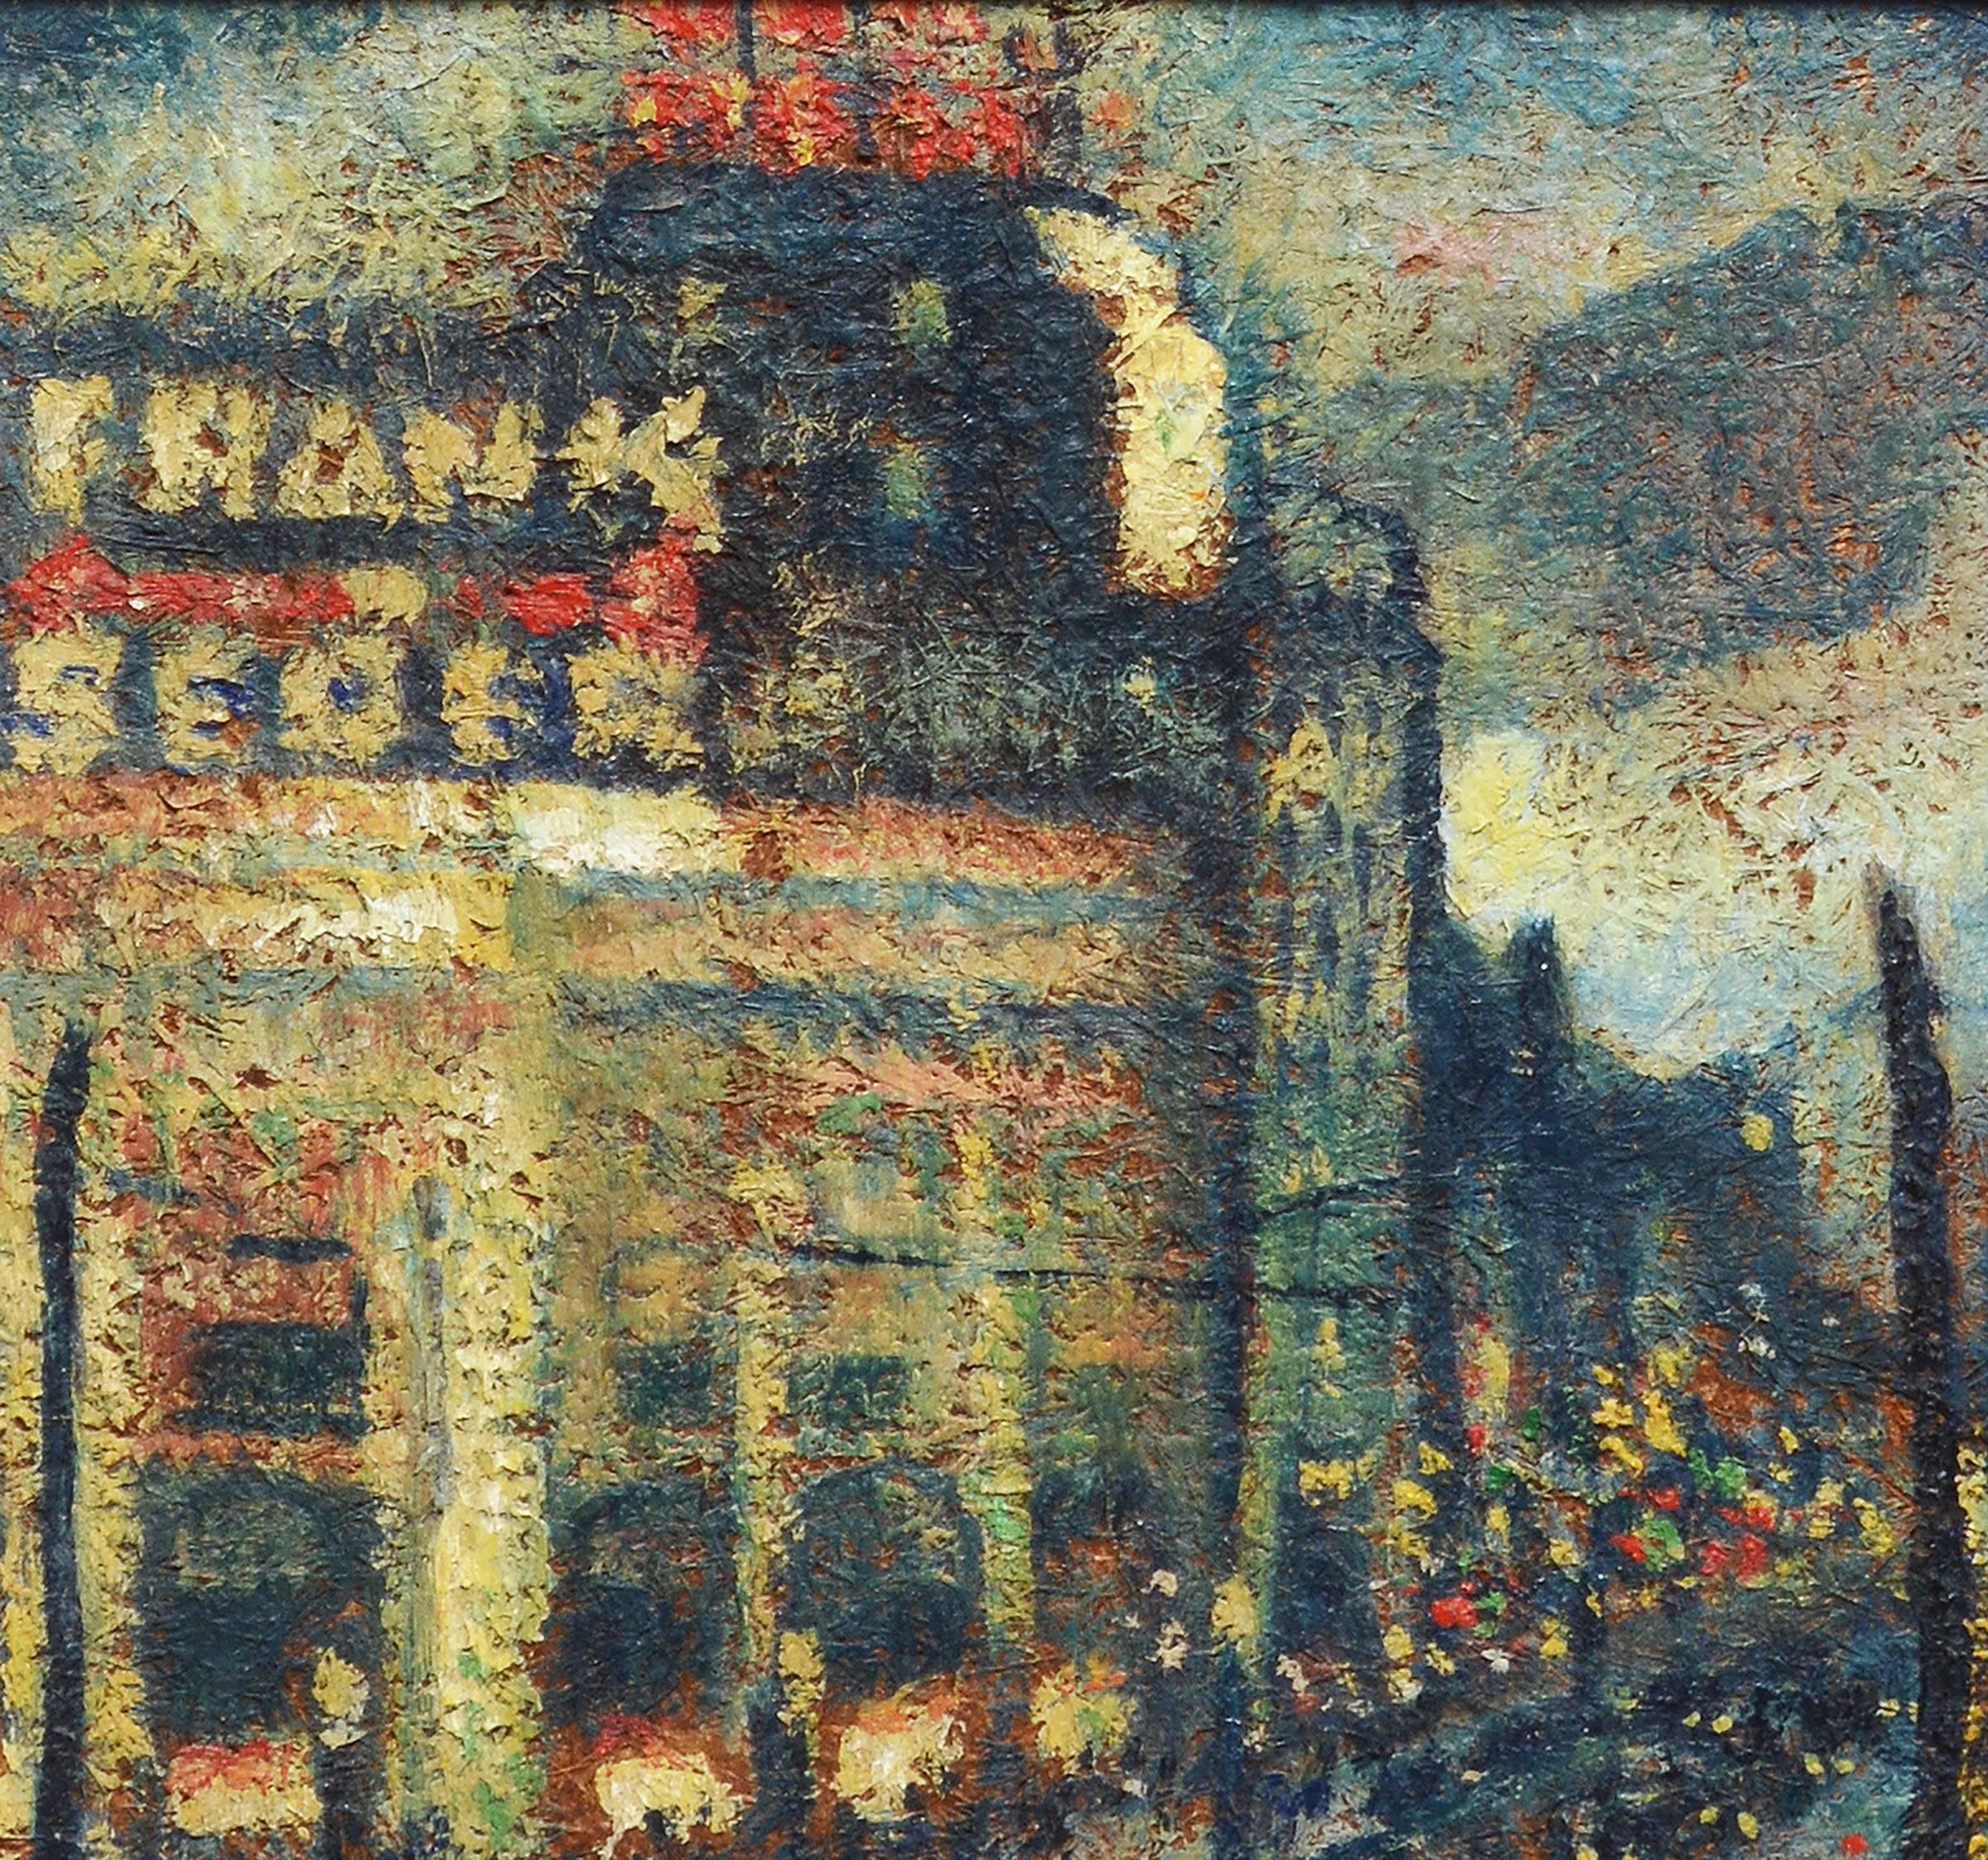 Aschcan school cityscape of New York.  Oil on board, circa 1925.  Signed illegibly lower right.  Displayed in a period giltwood frame.  Image size, 9